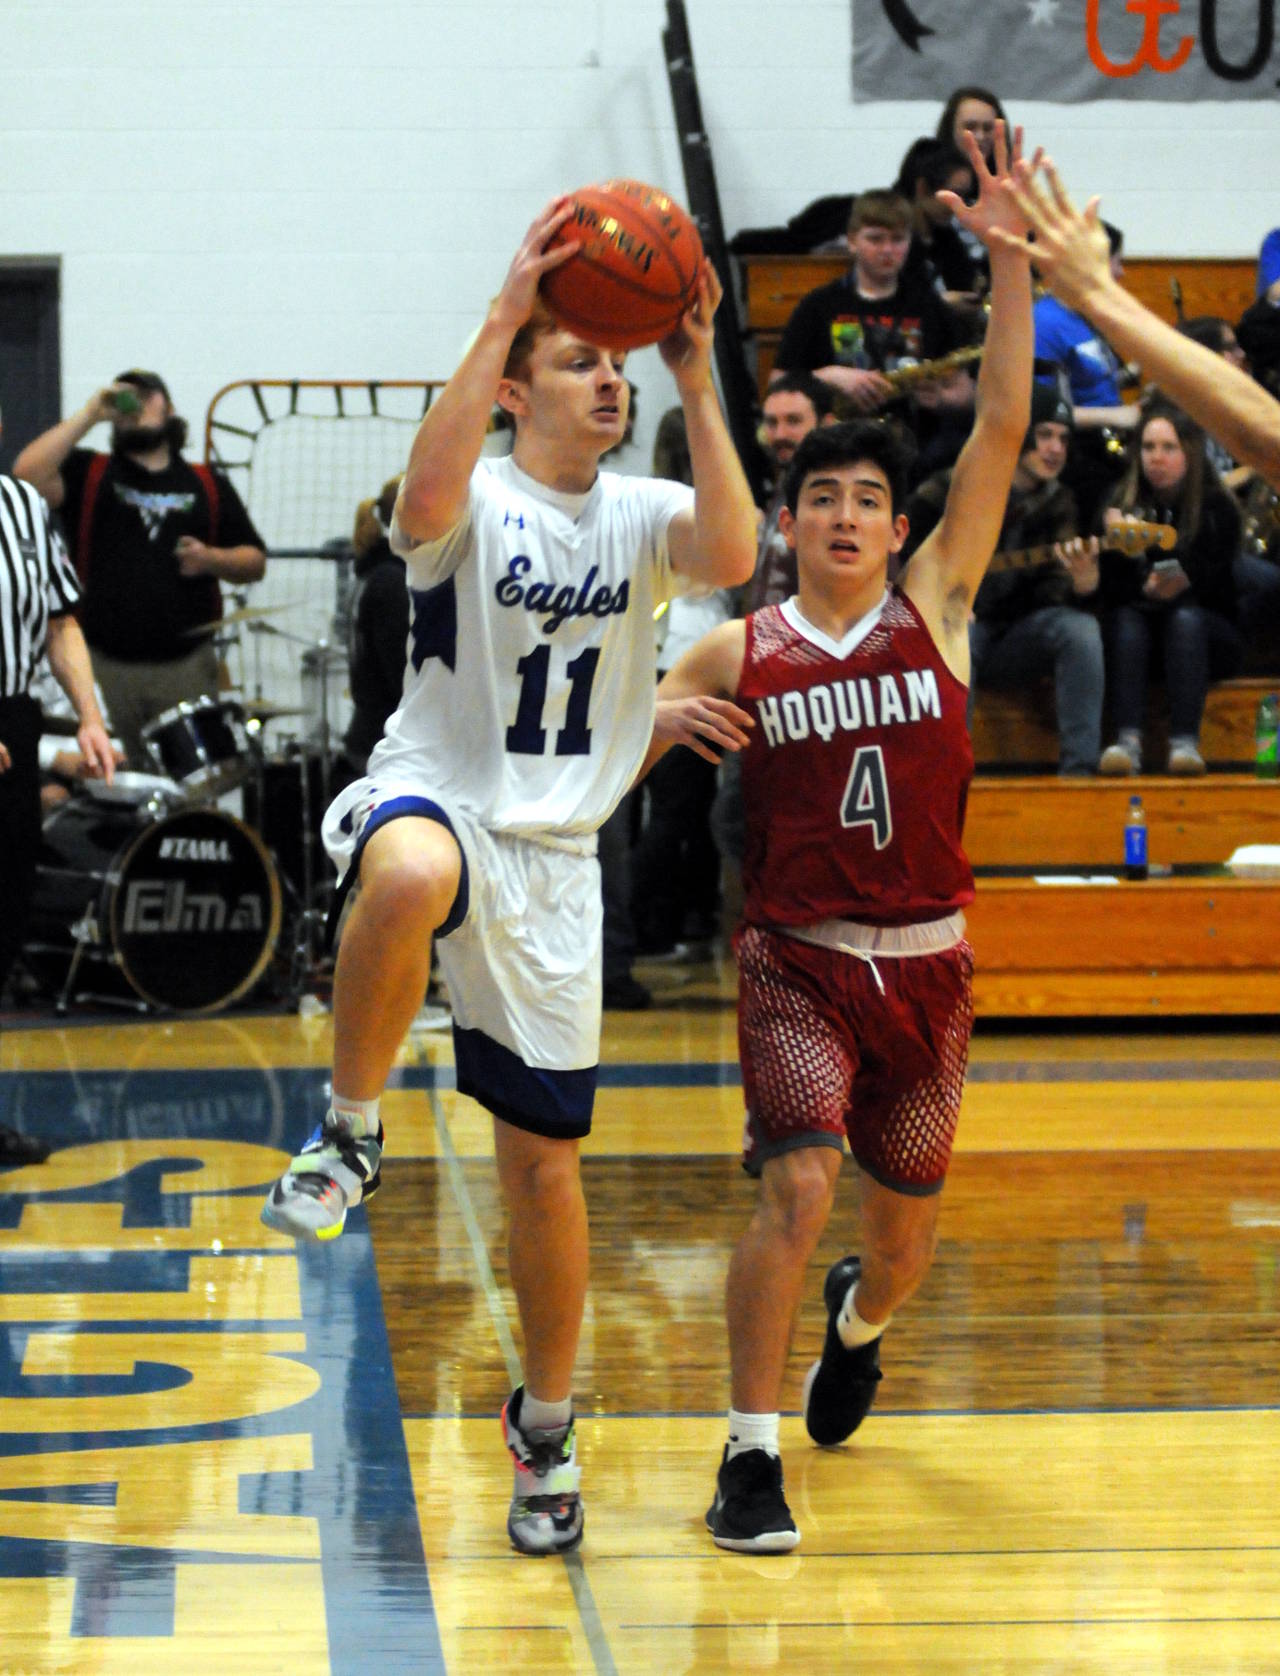 Elma’s Nick Church drives the baseline against Hoquiam’s Abe Morales during the Grizzlies’ 52-50 victory on Friday in Elma. (Ryan Sparks | Grays Harbor News Group)